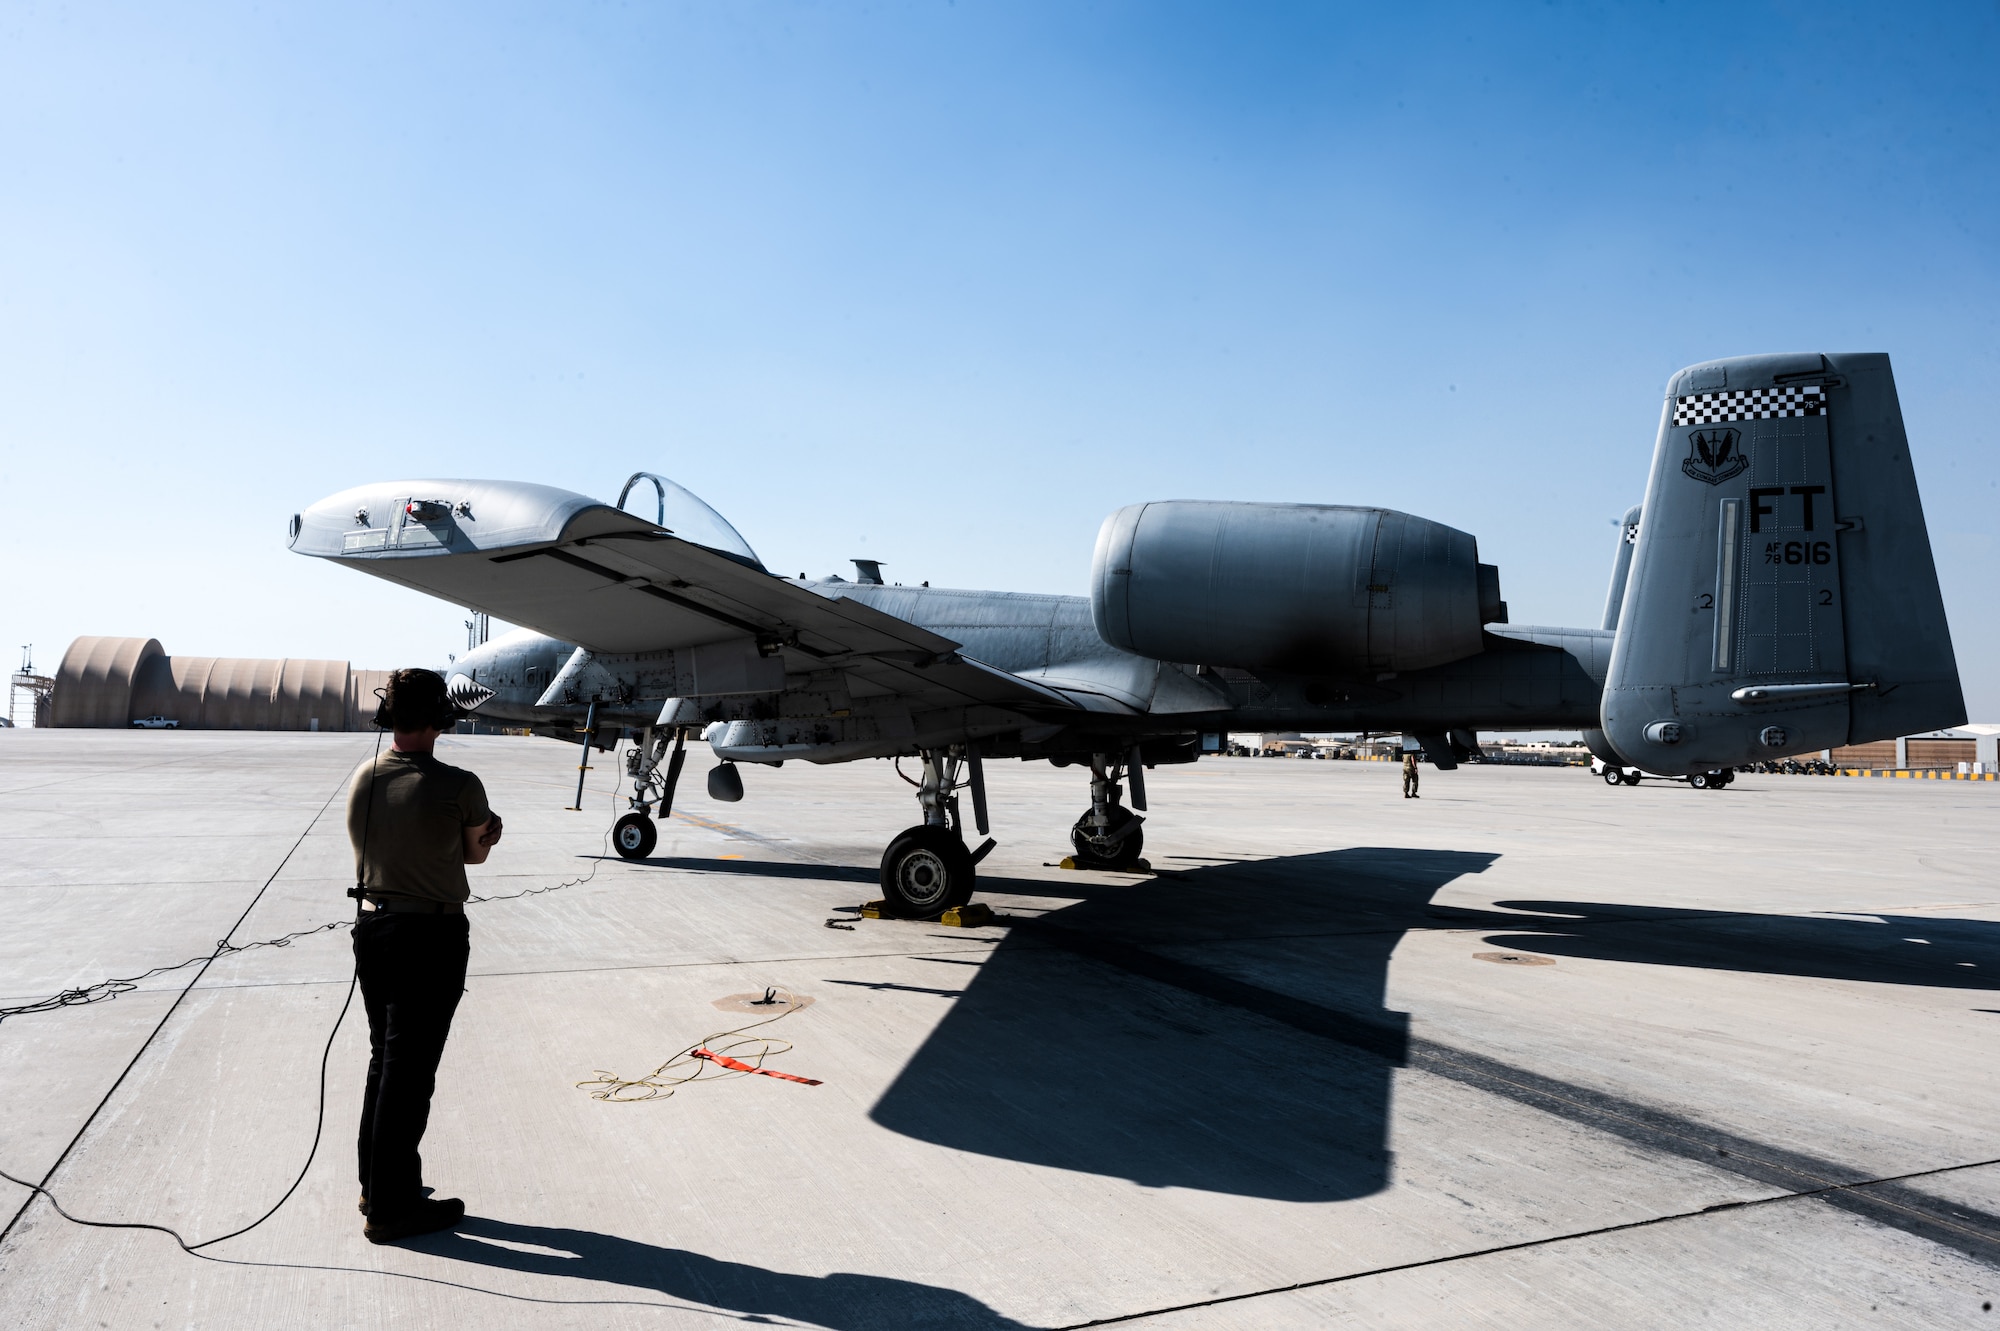 U.S. Air Force Airman First Class Mayson Browning, 75th Expeditionary Fighter Generation Squadron crew chief, prepares a U.S. Air Force A-10 Thunderbolt II before the first sortie at Al Dhafra Air Base, United Arab Emirates, April 6, 2022. Since its creation in 1975, the A-10 has provided air support to ground troops, destroying adversary forces and infrastructure as the first aircraft designed specifically for close air support. (U.S. Air Force photo by Staff Sgt Sabatino DiMascio)